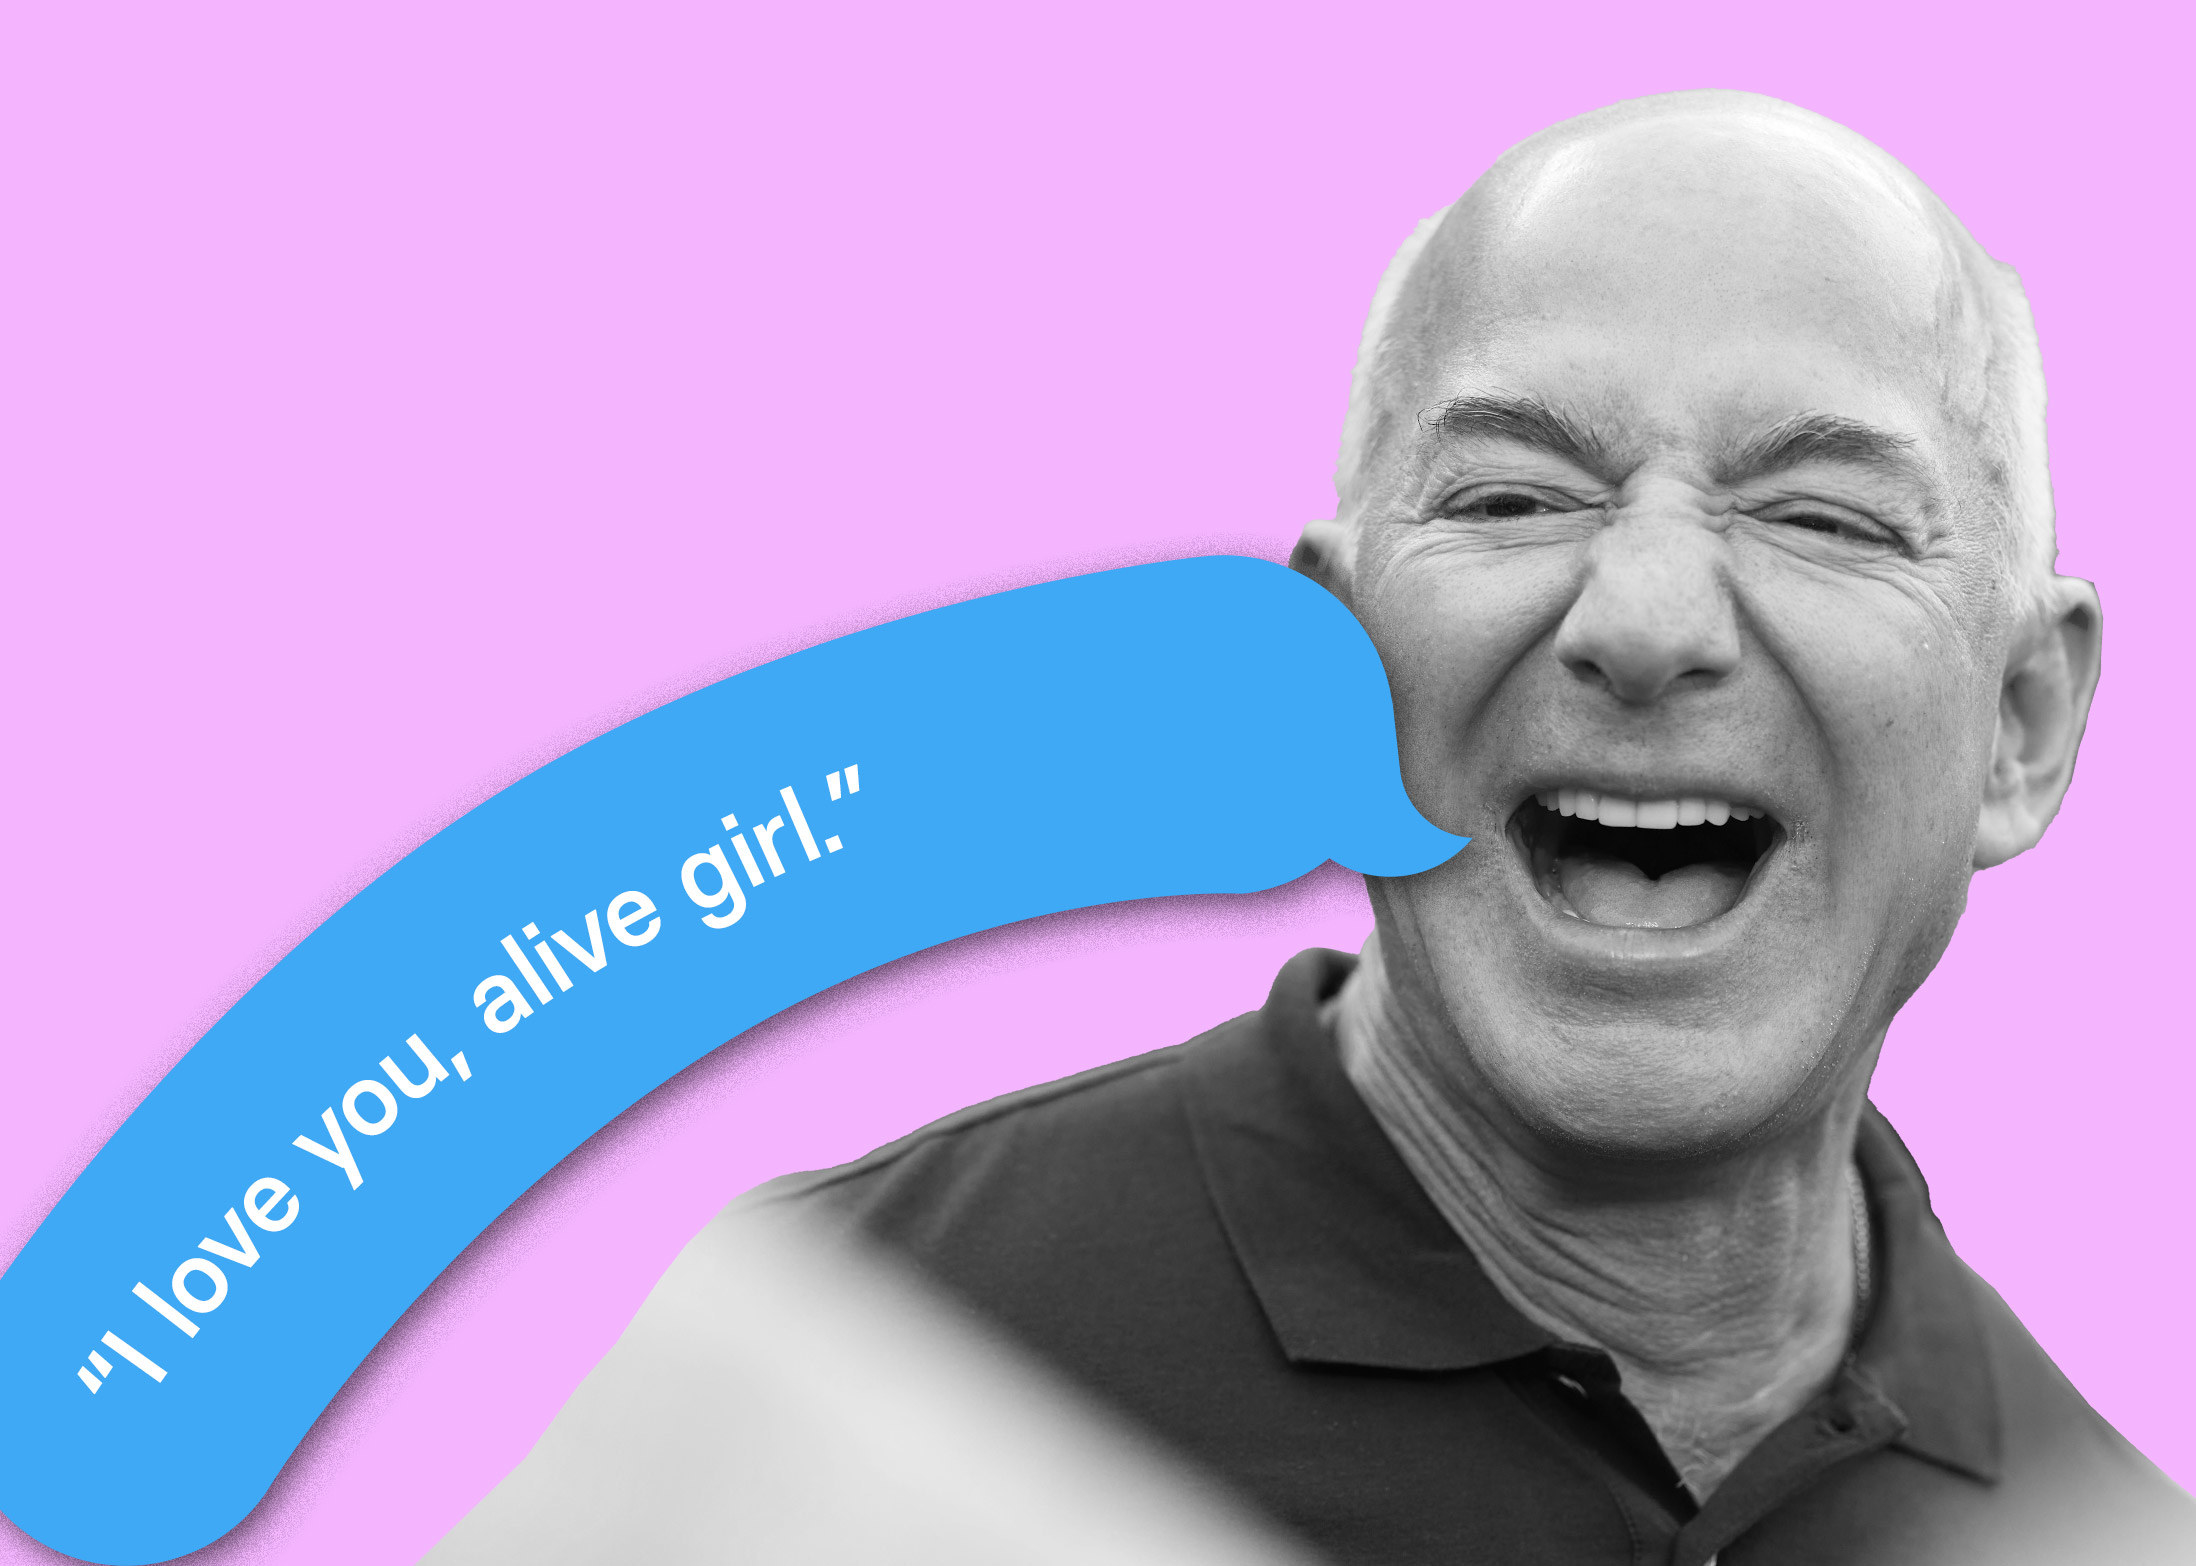 Jeff Bezos with a droopy text message bubble next to his mouth that reads &quot;I love you, alive girl.&quot;